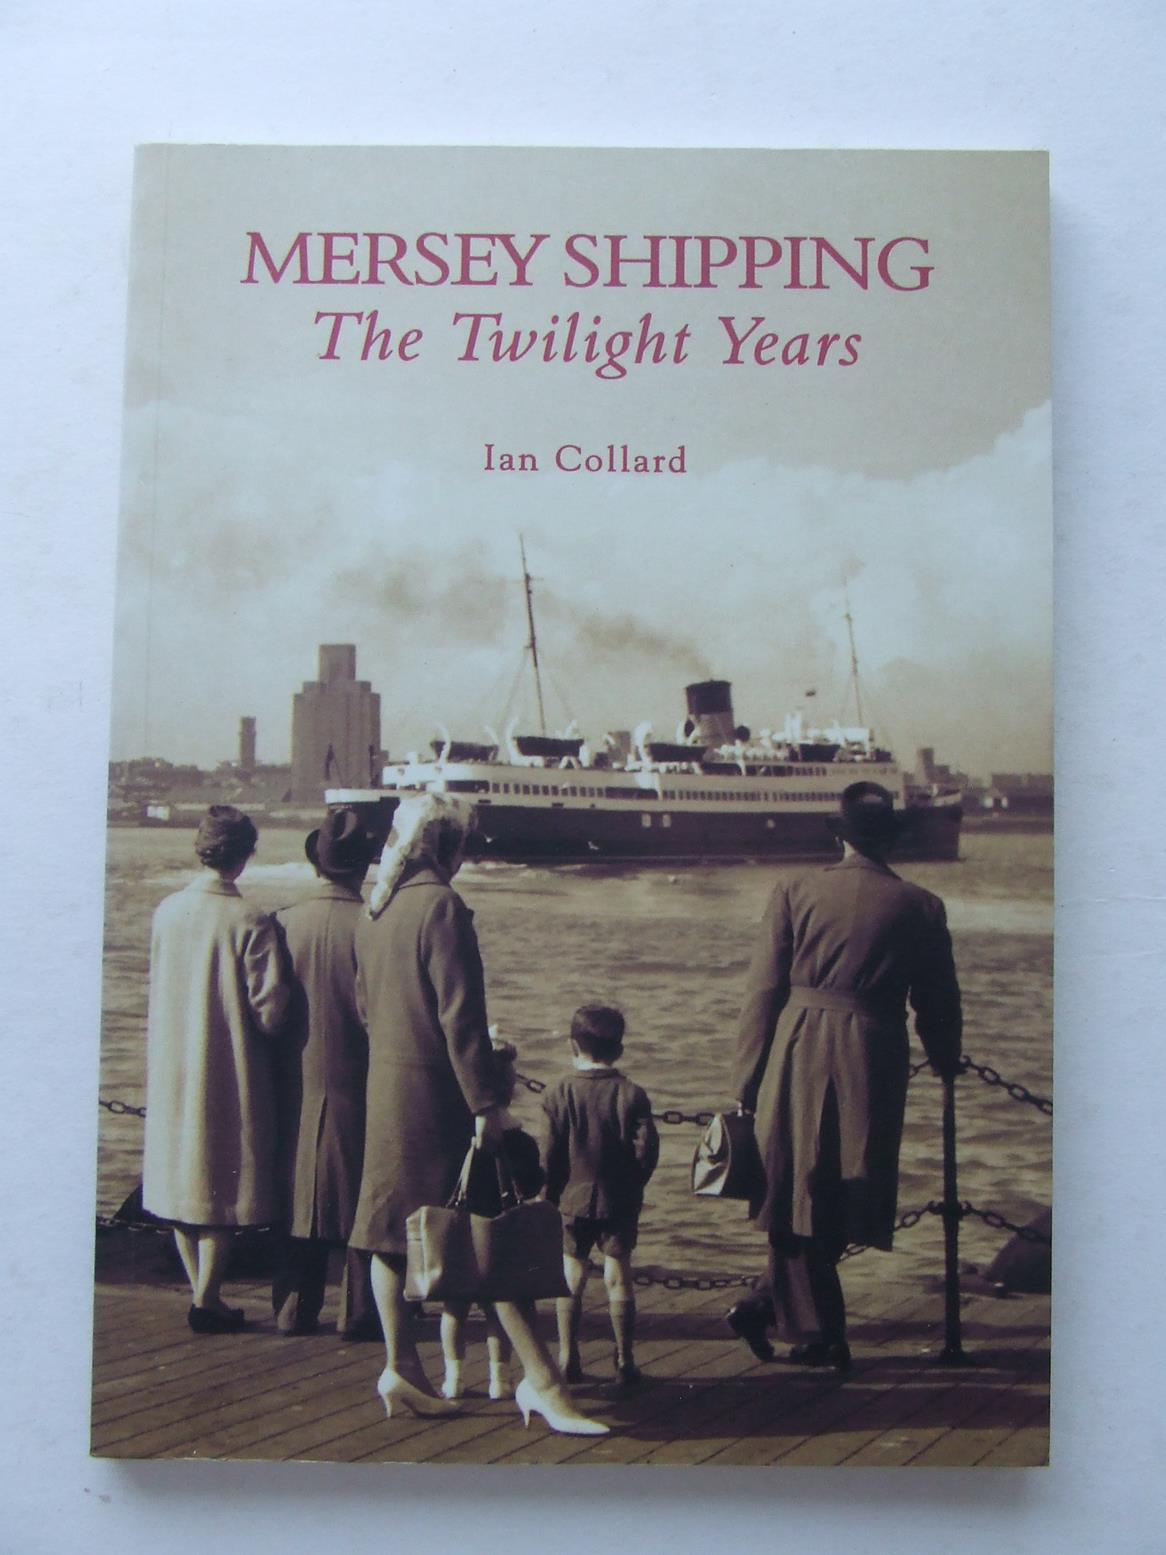 Mersey Shipping, the twilight years